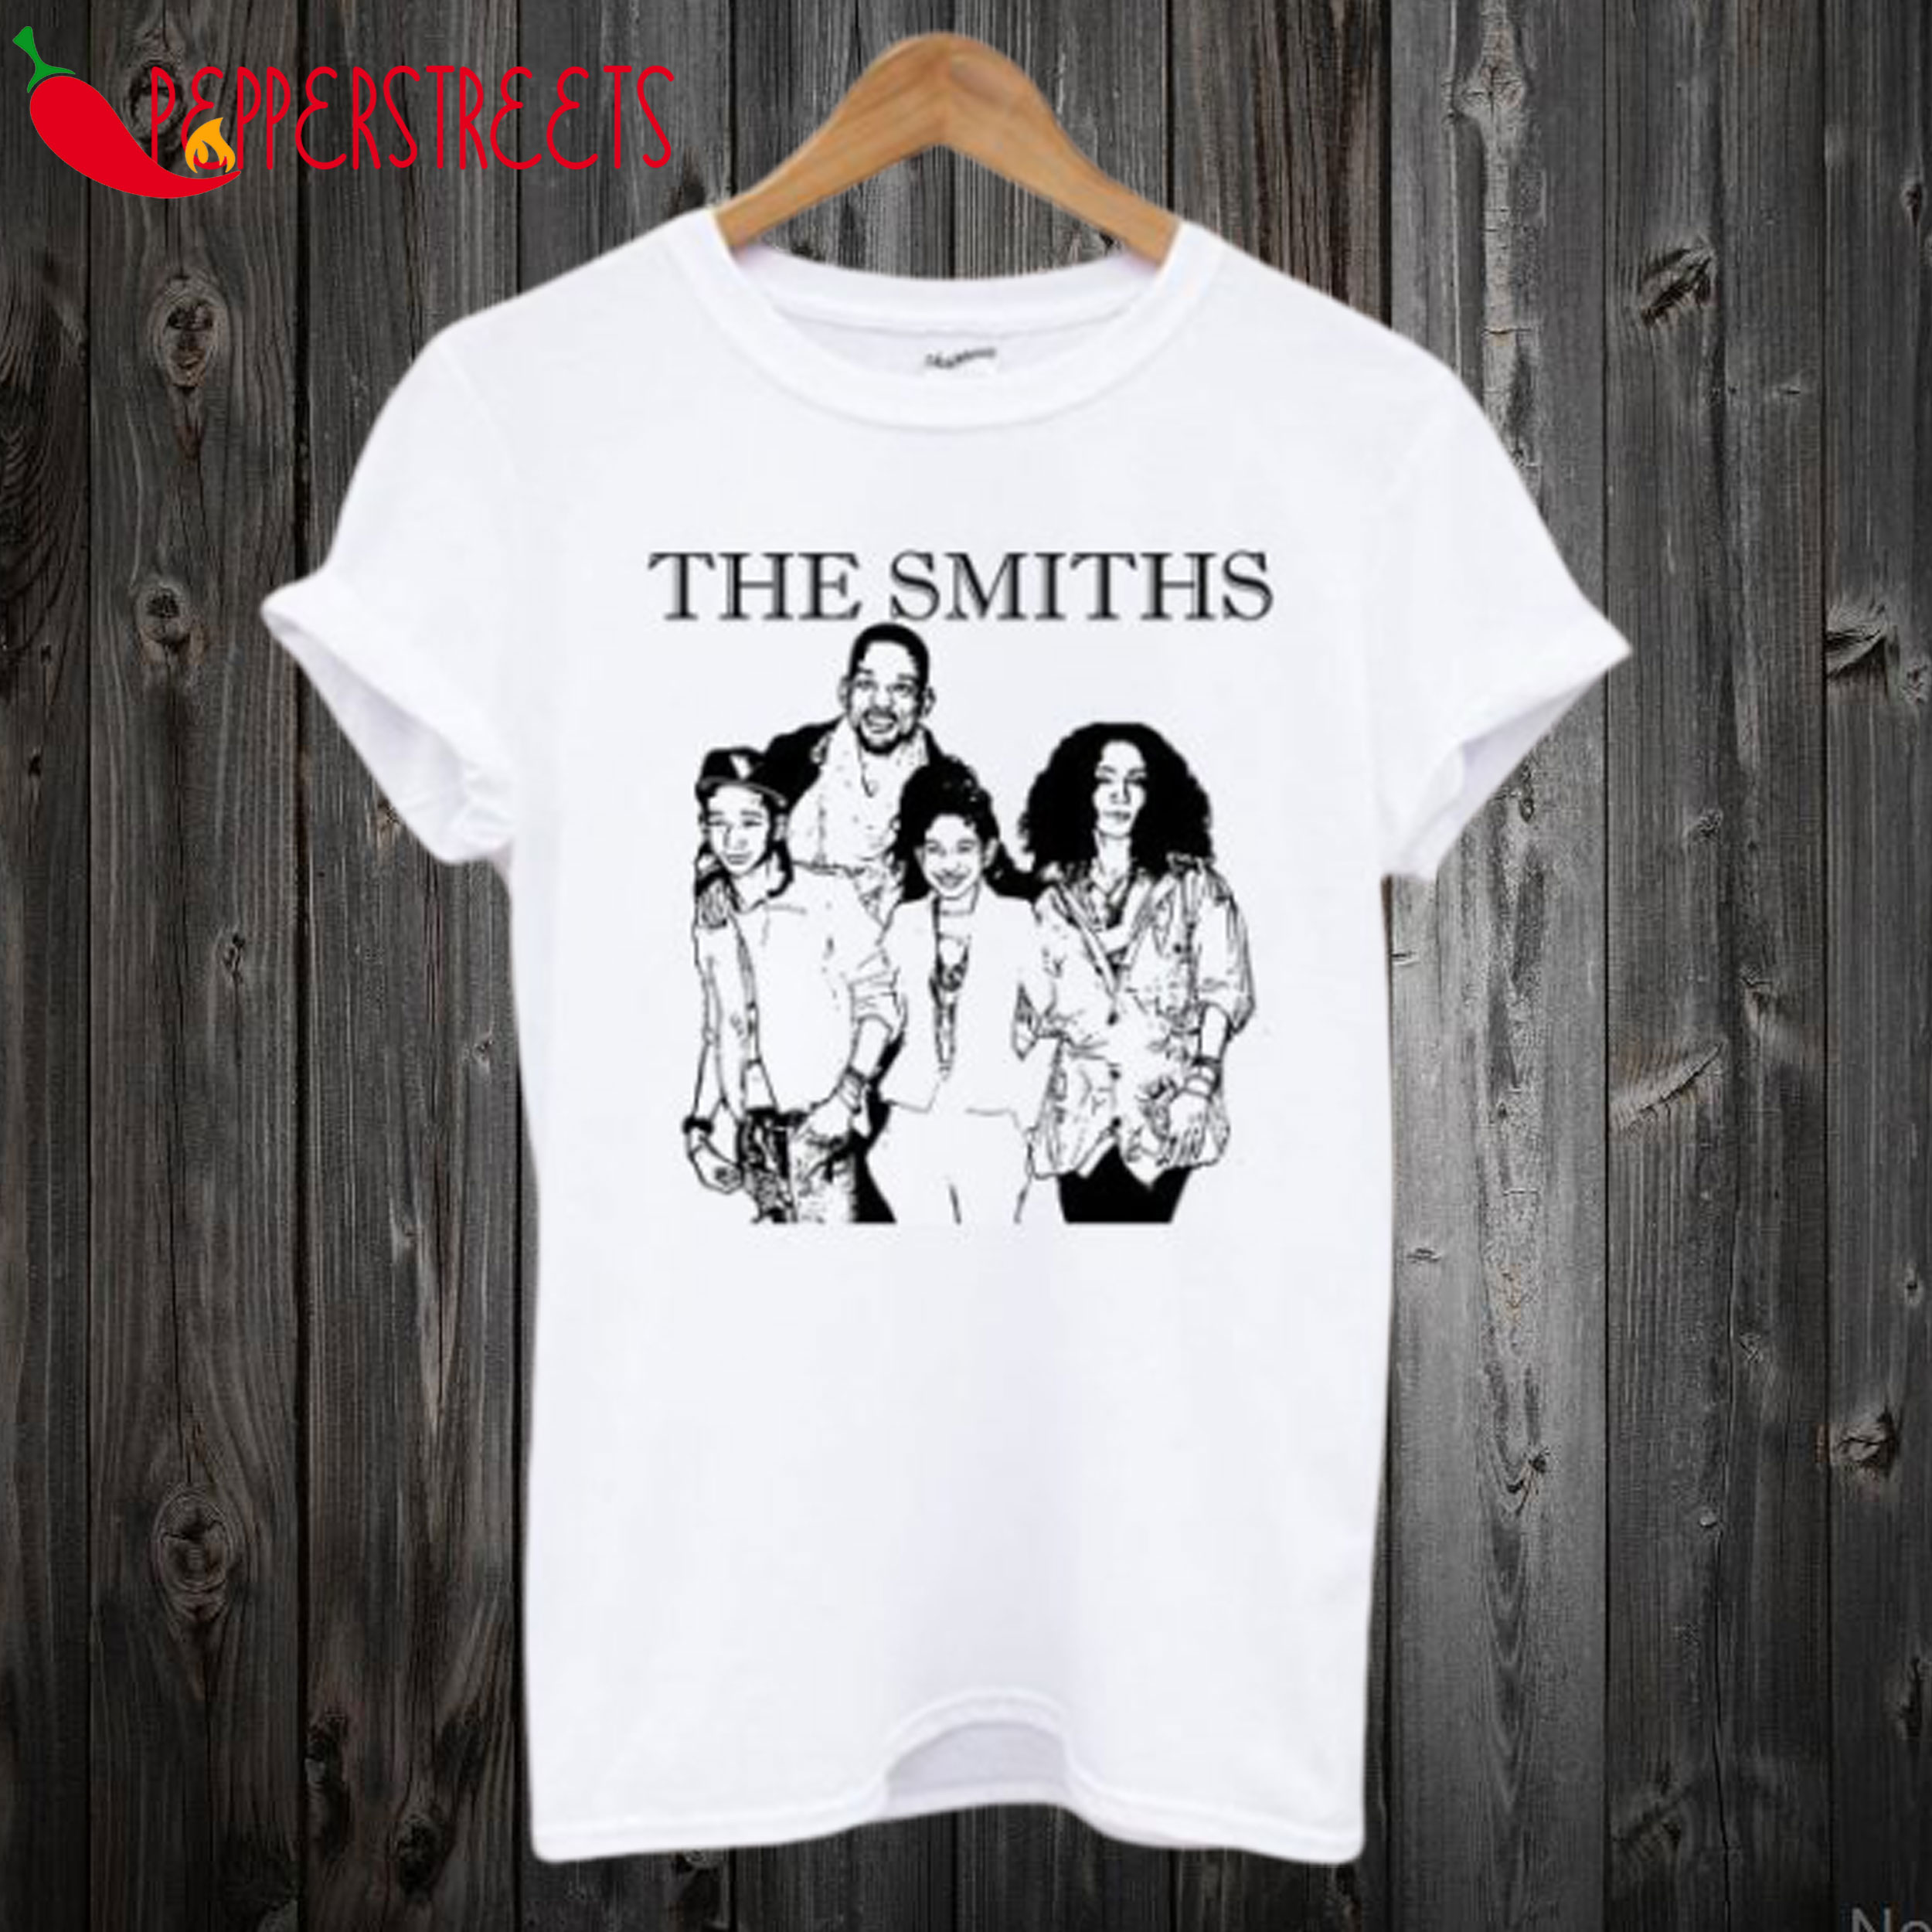 The Smiths Tees shirt